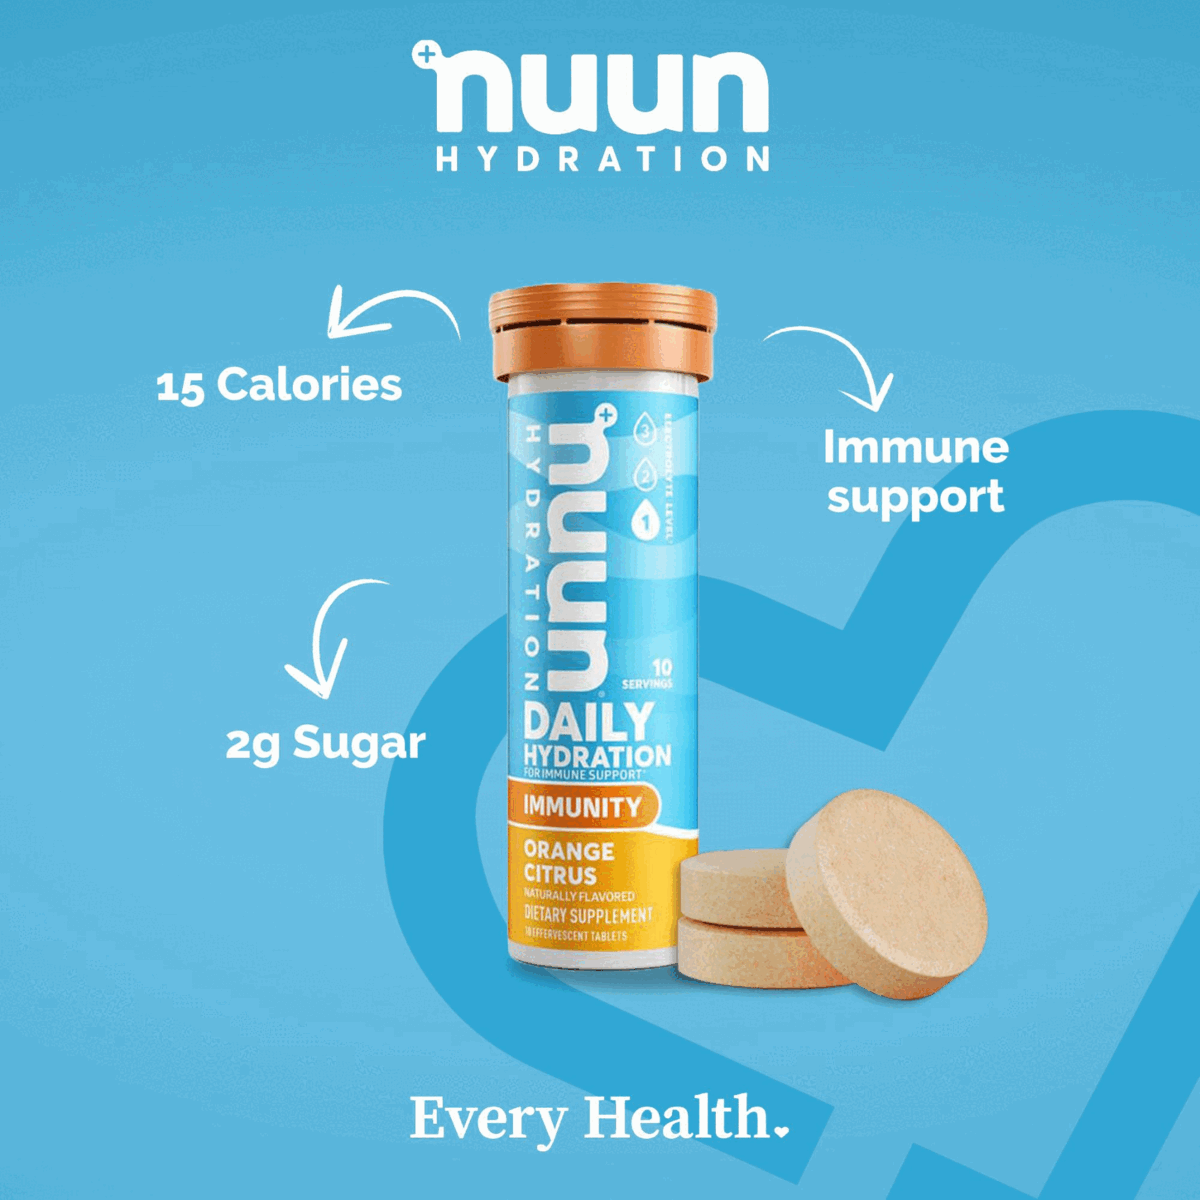 Nuun hydration. 15 calories, immune support, 2g sugar. EVERY HEALTH. Free Nuun Sample on Orders over £40.